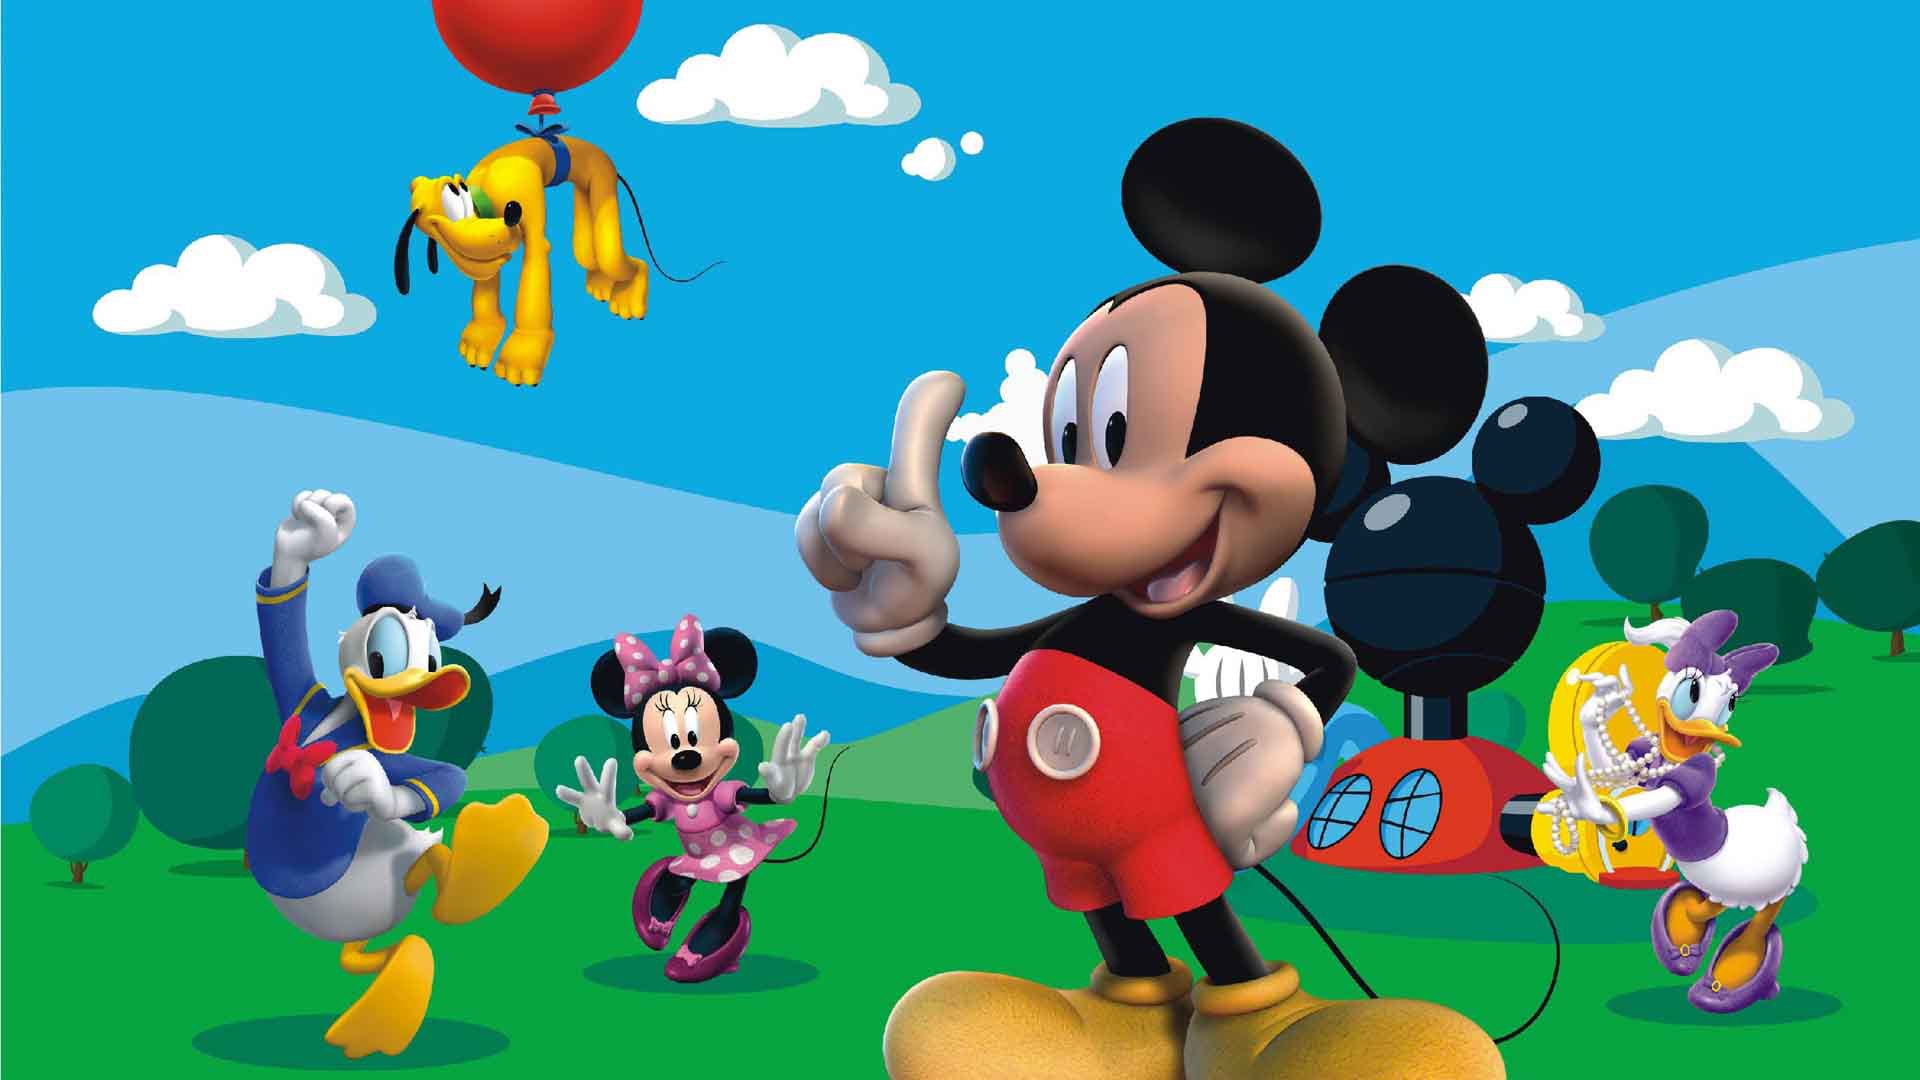 Free Download Mickey Mouse Computer Wallpaper 19x1080 For Your Desktop Mobile Tablet Explore 24 Mickey Mouse Pc Wallpapers Mickey Mouse Background Mickey Mouse Wallpaper Mickey Mouse Backgrounds